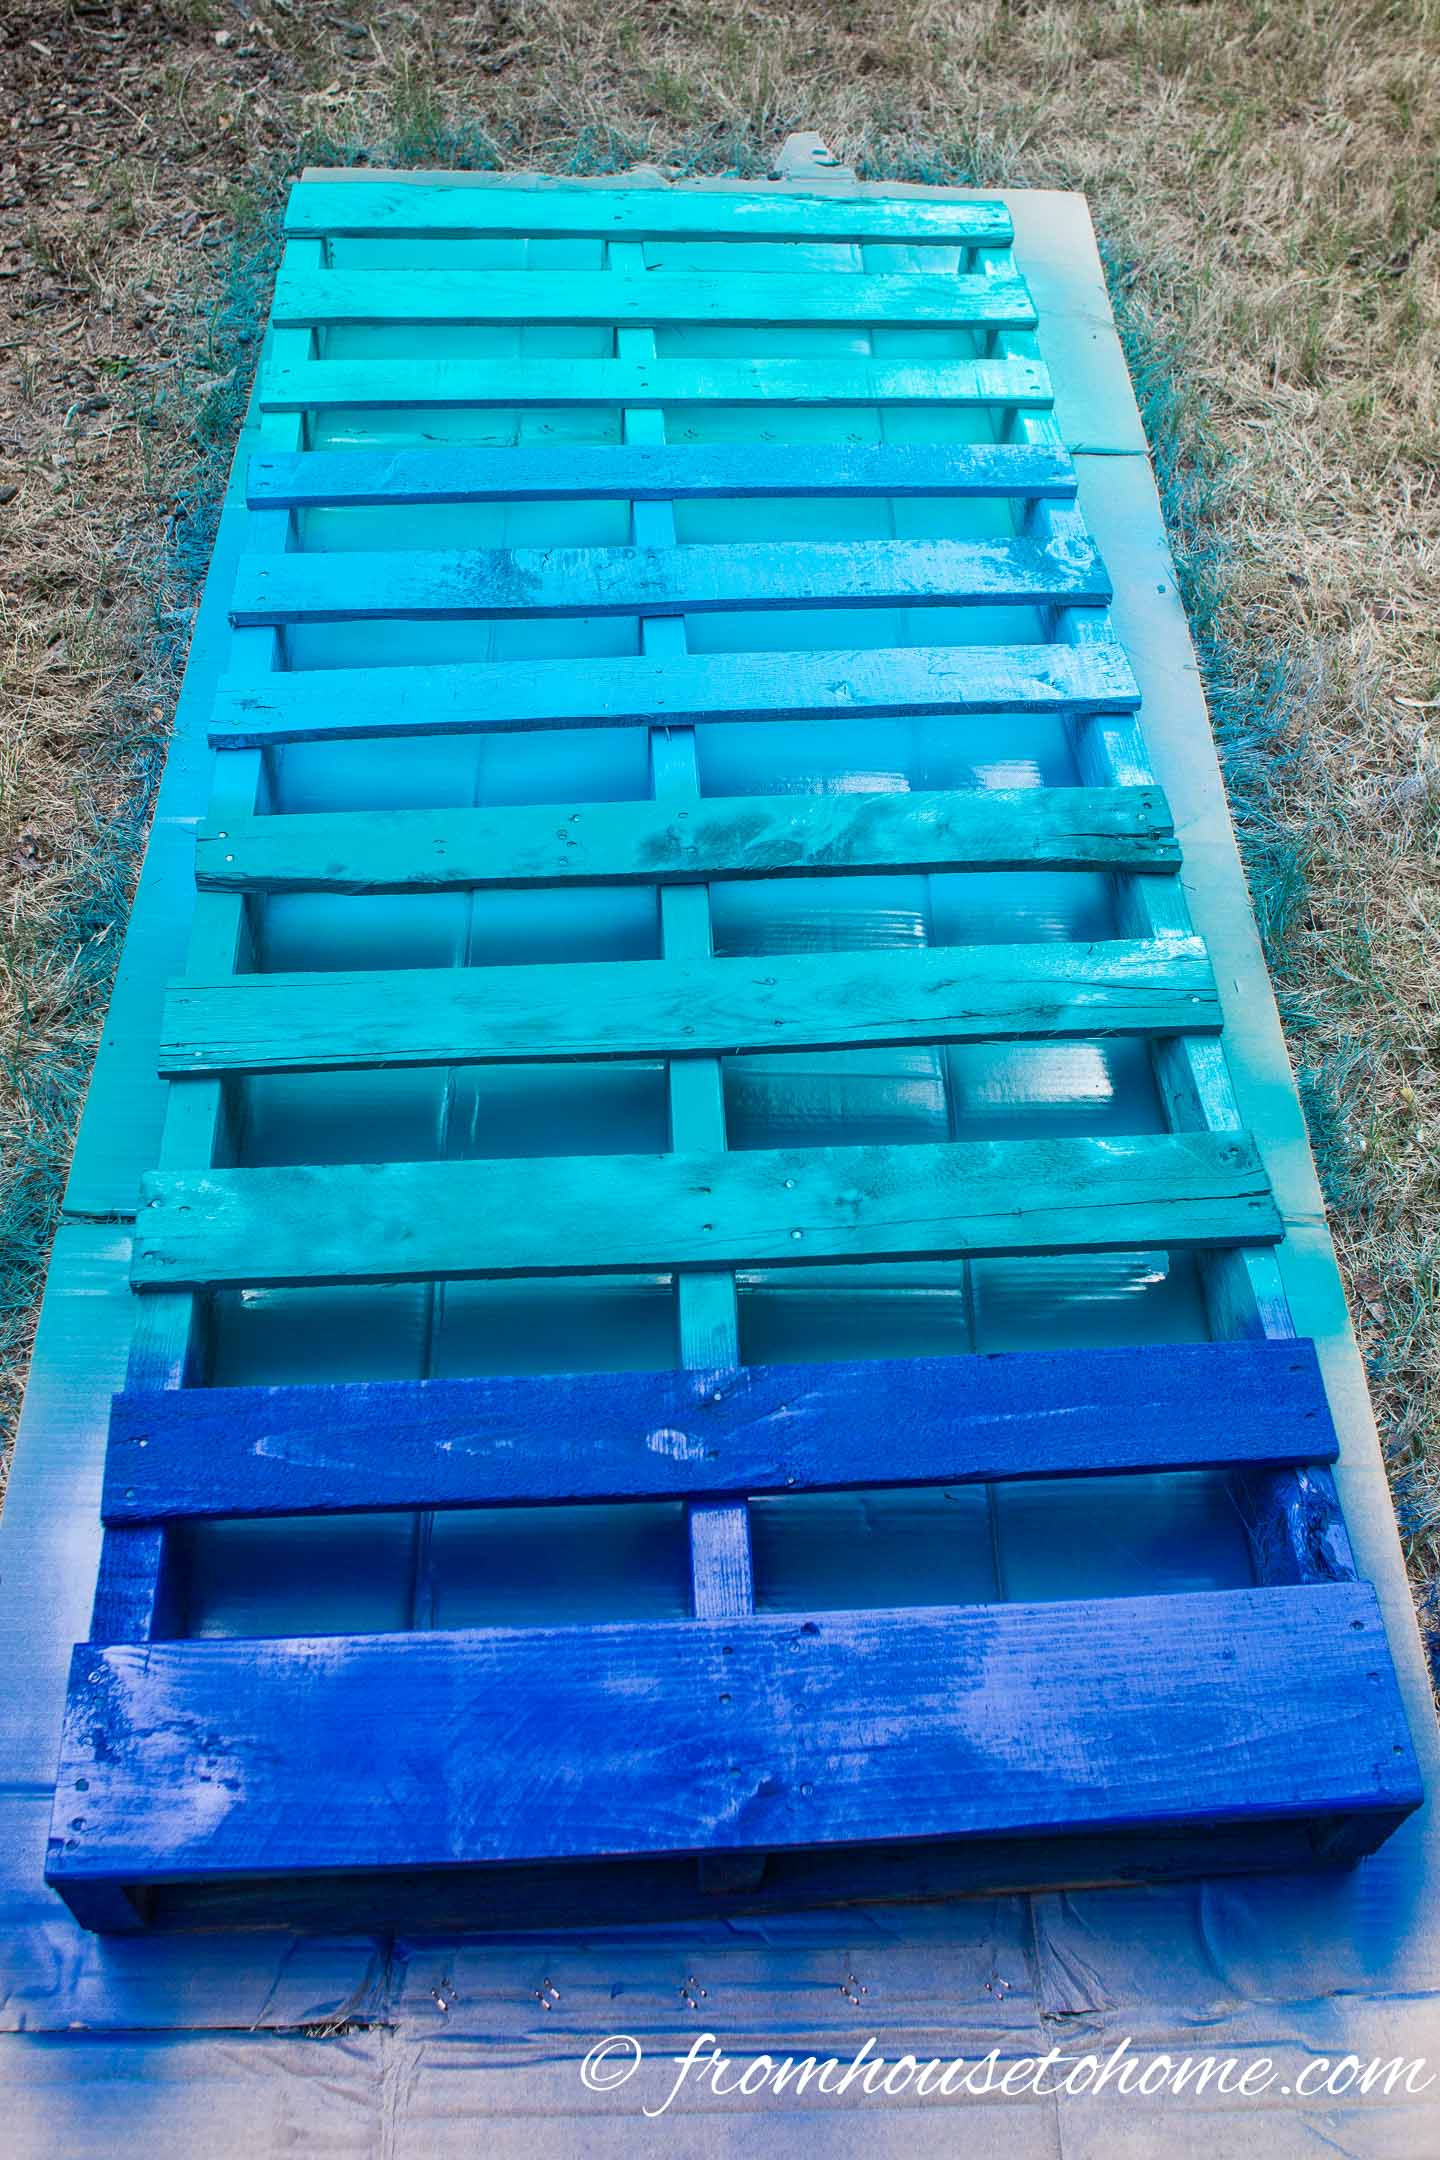 Pallet painted in a blue ombre pattern